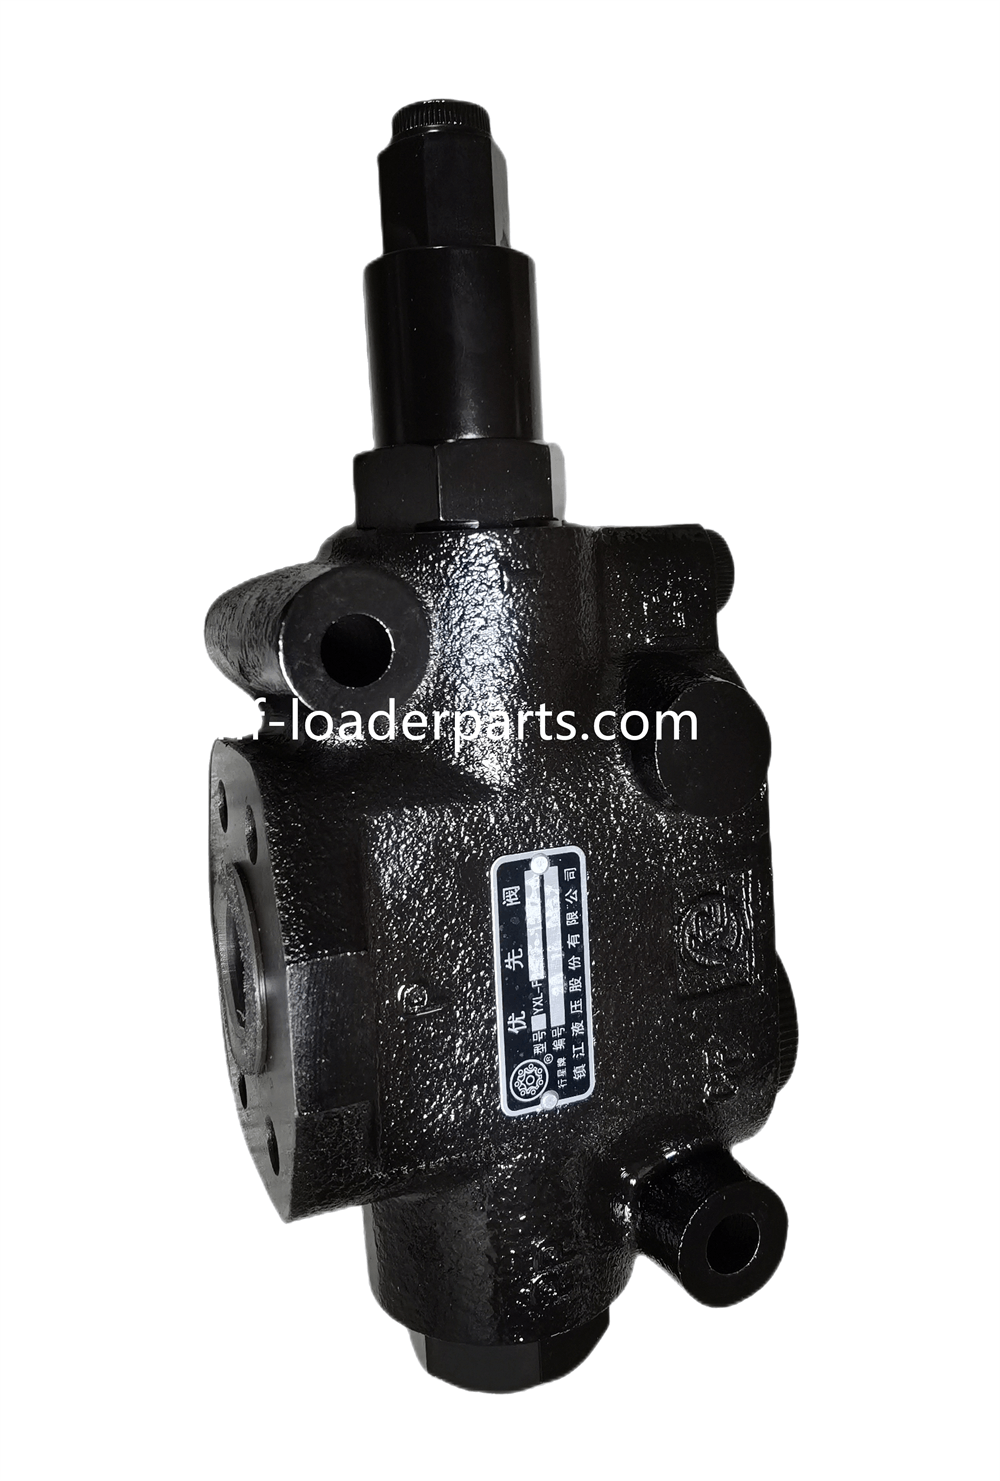 Priority flow control valve for Lonking 855 60304000044